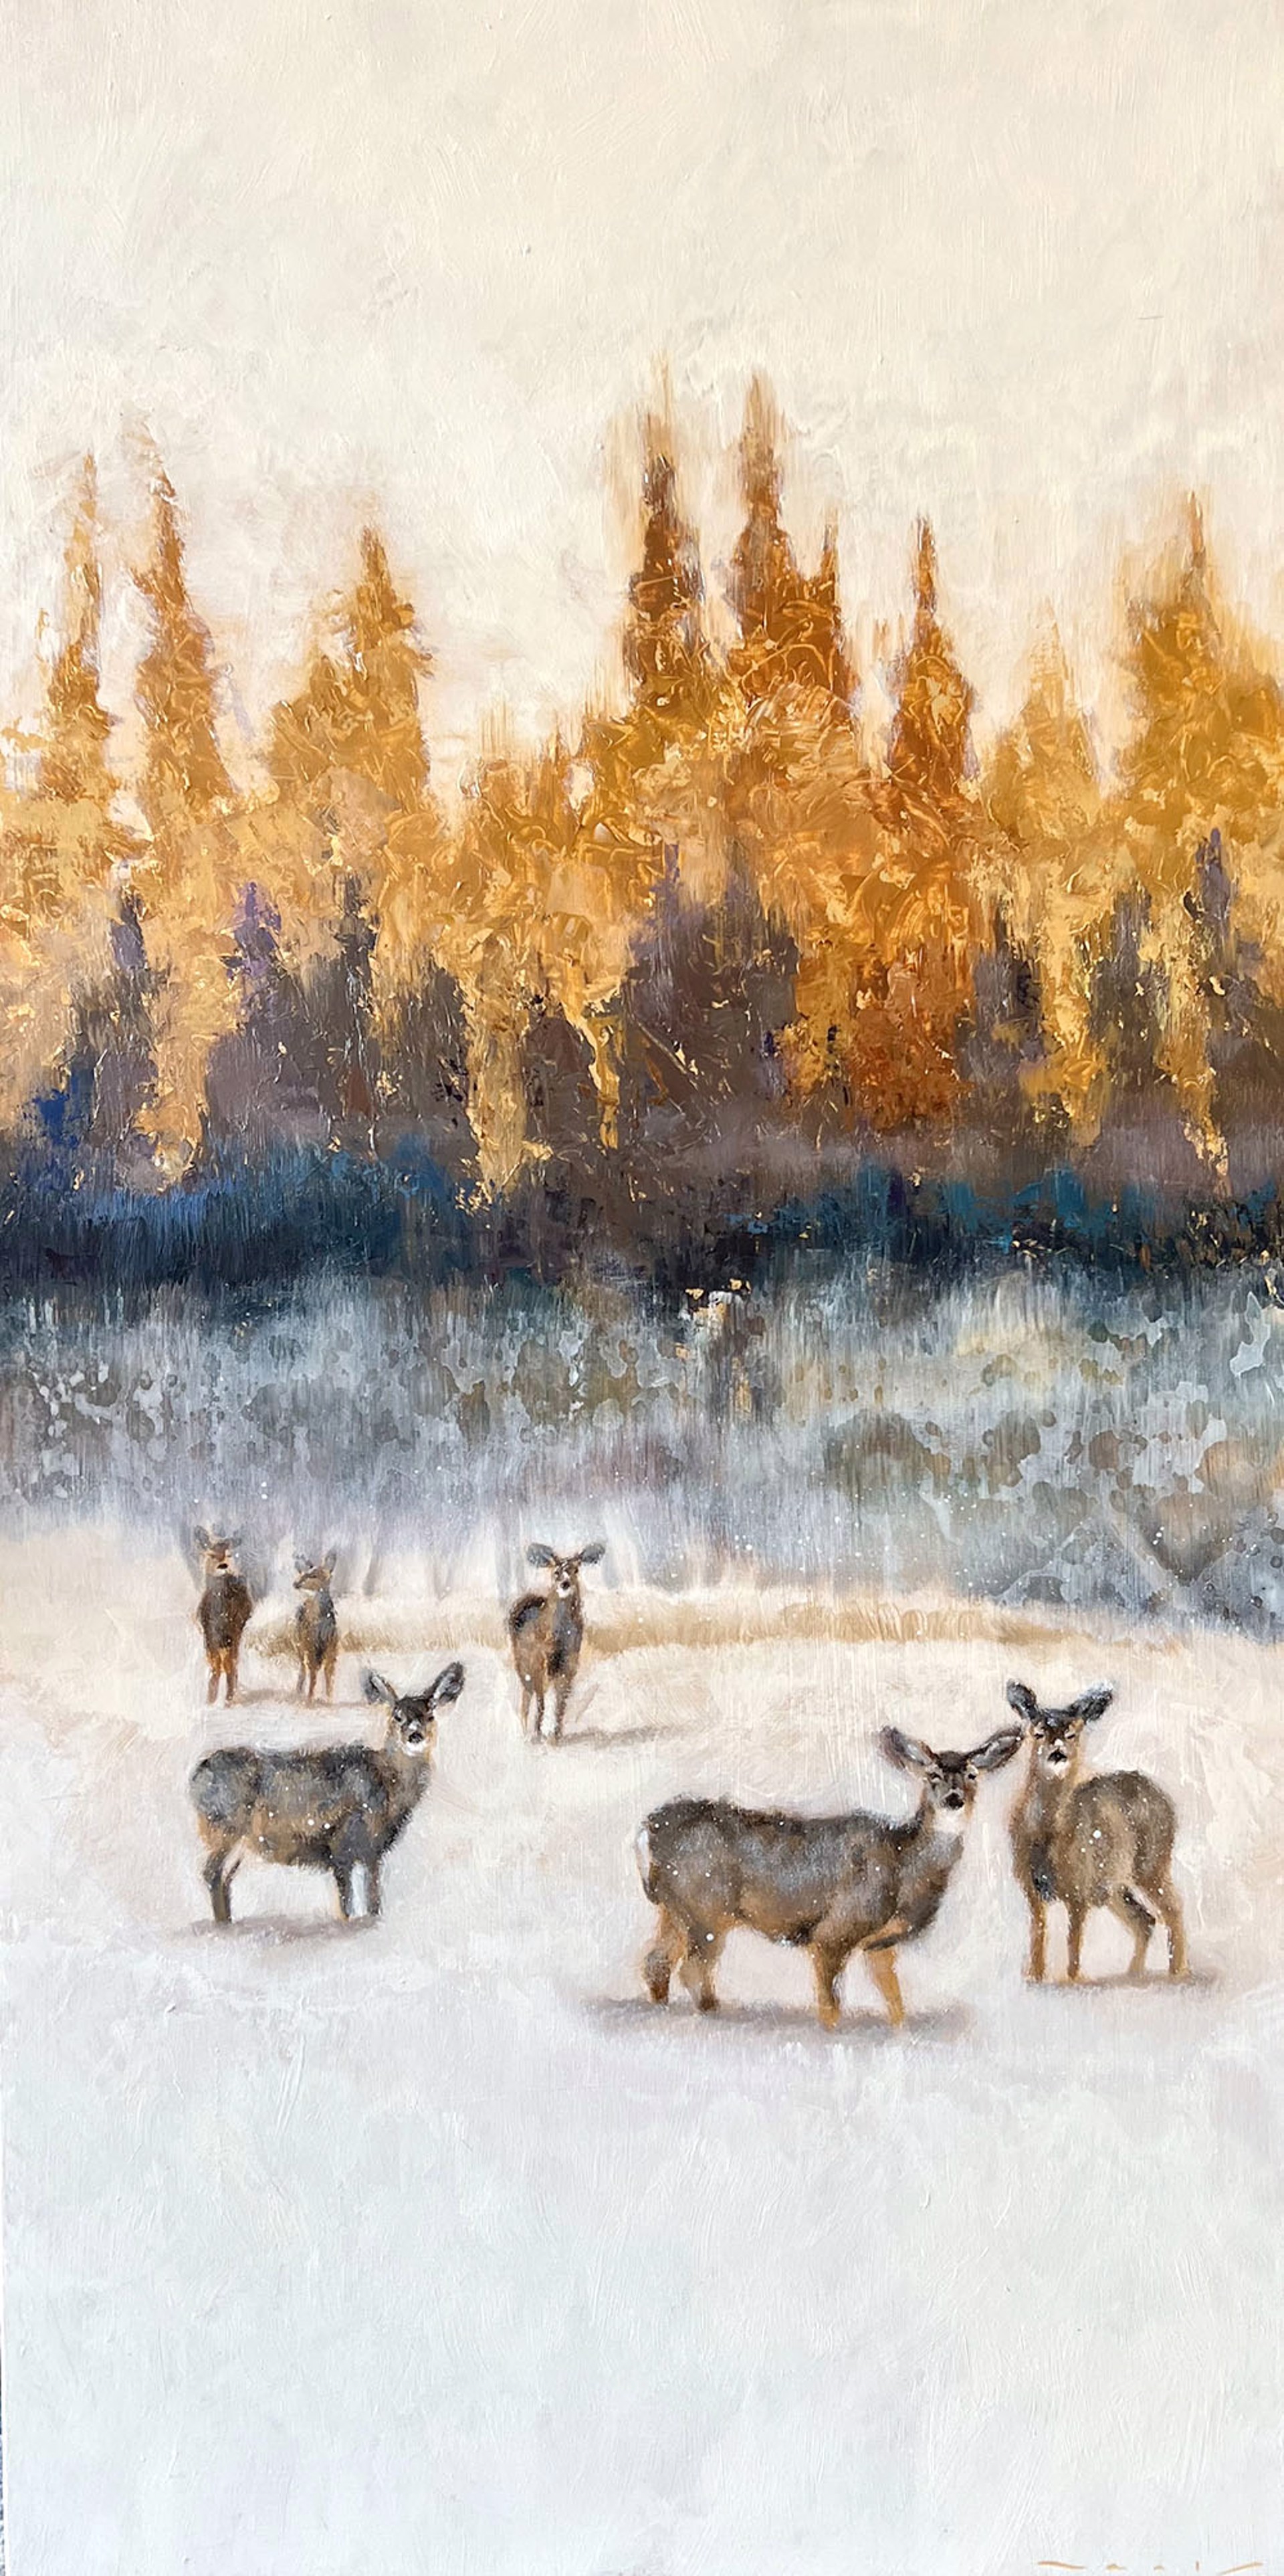 Original Mixed Media Painting By Nealy Riley Featuring A Herd Of Mule Deer On Snowy Abstracted Landscape With Gold Leaf Highlights